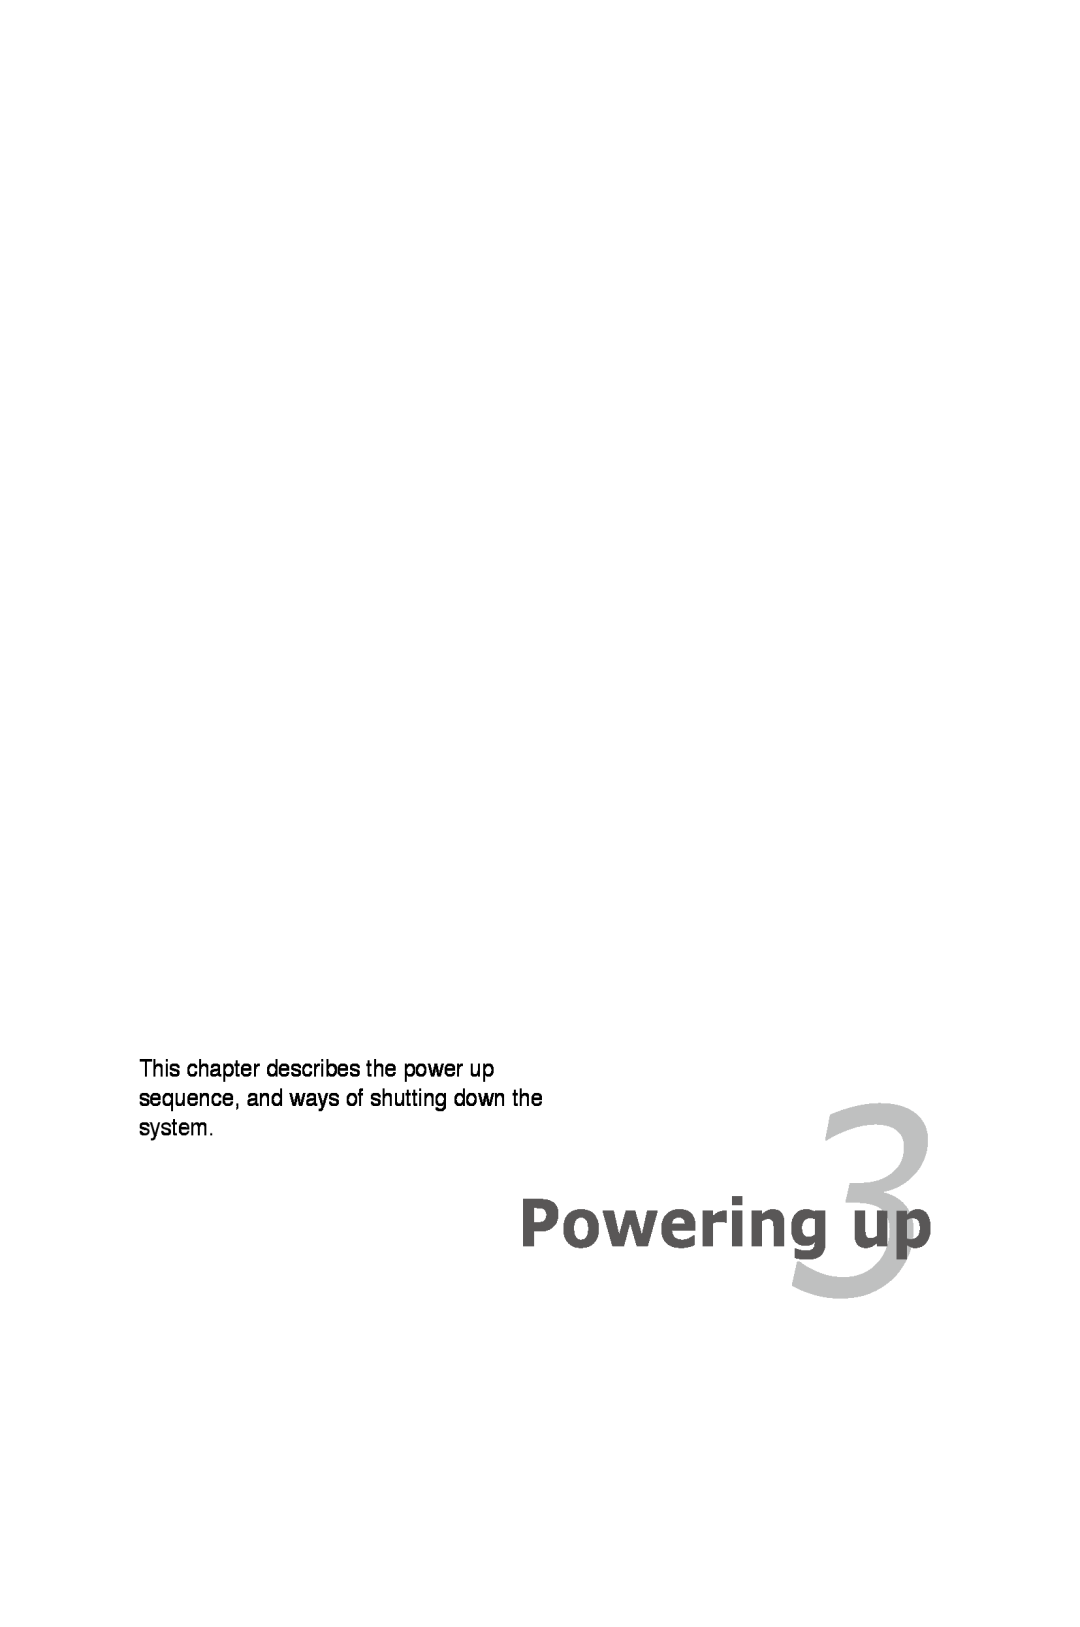 Asus Z7S WS manual Chapter, Powering3up 